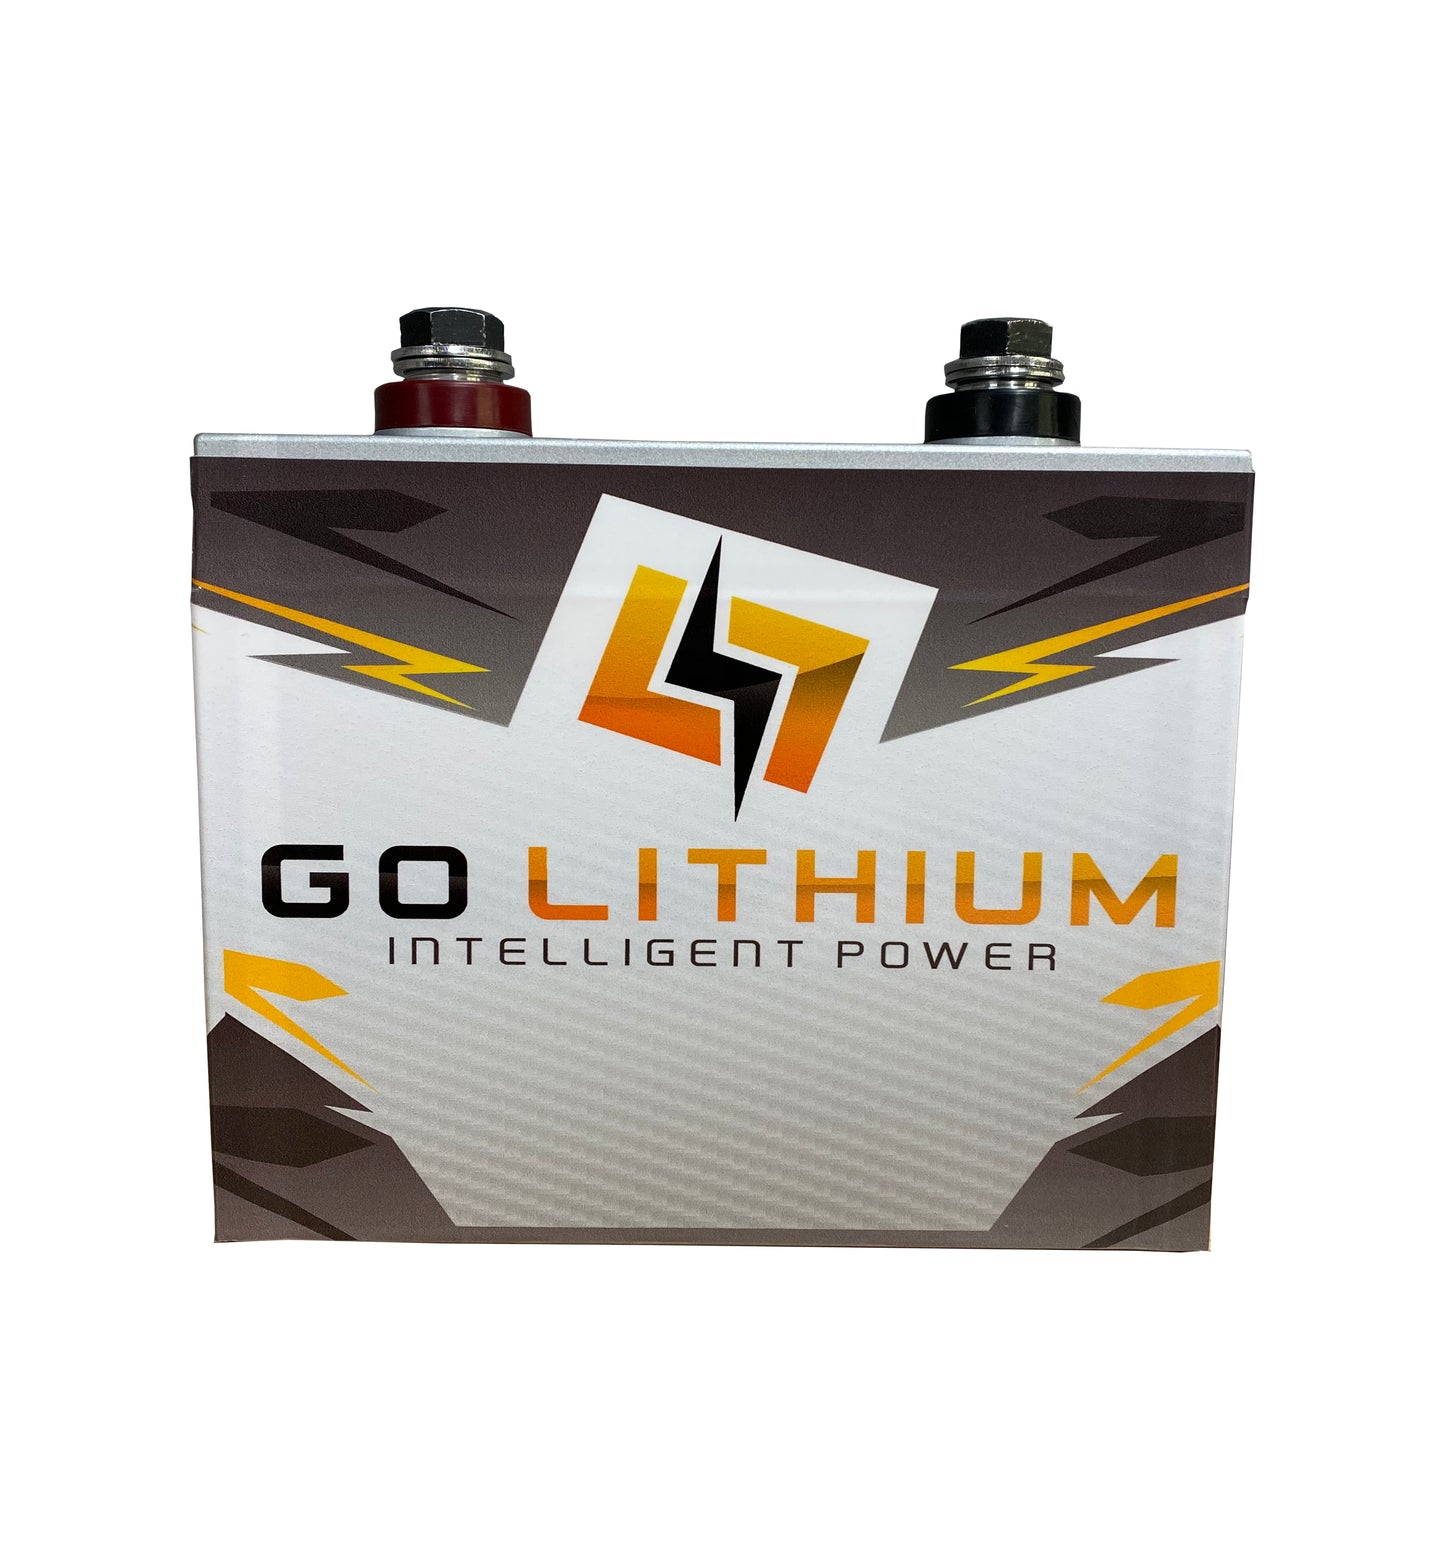 GO Lithium 16v Battery & Charger Package